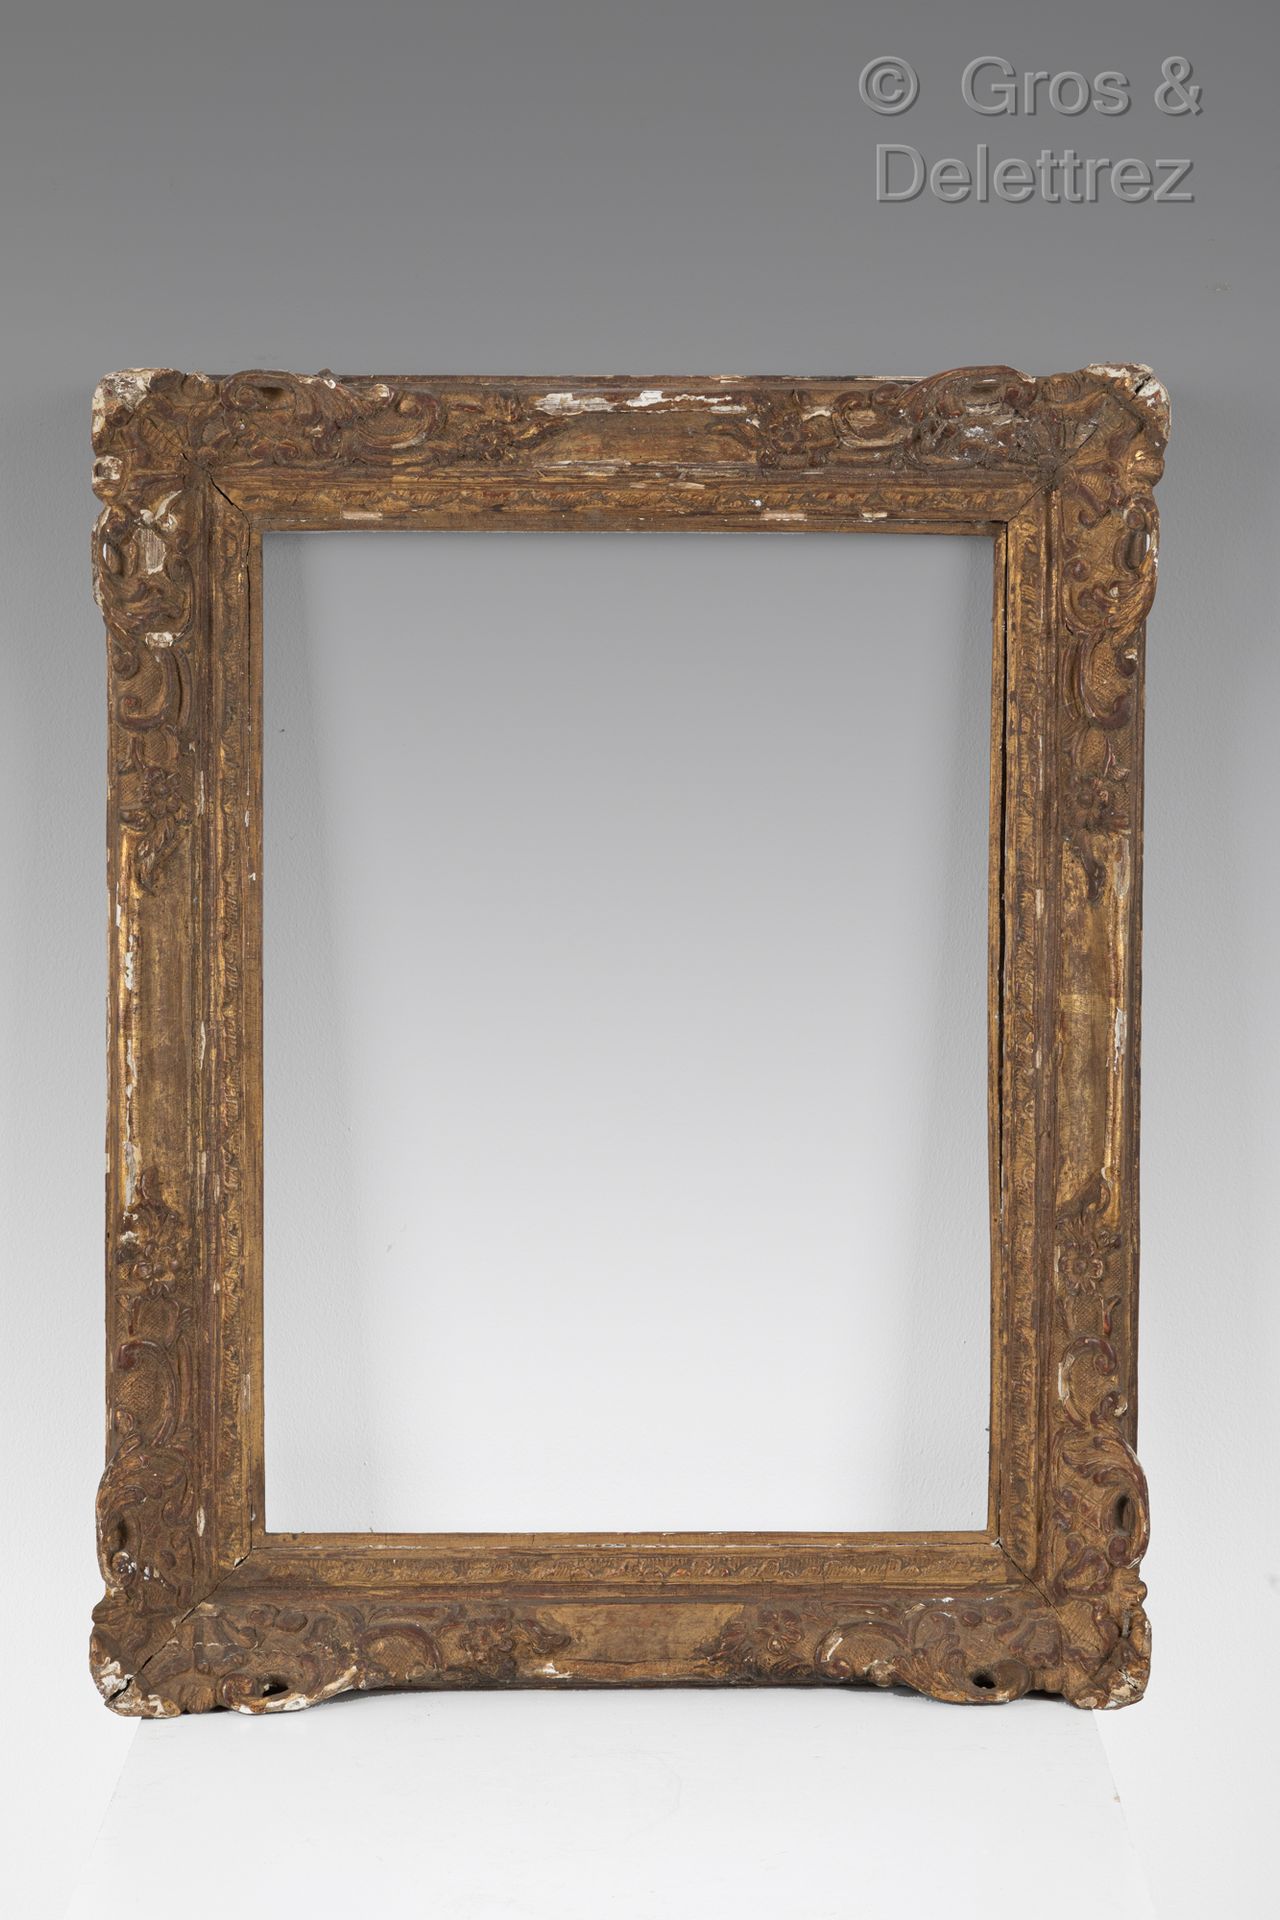 Null Carved and gilded wood frame with scrolls in the corners.

Louis XIV period&hellip;